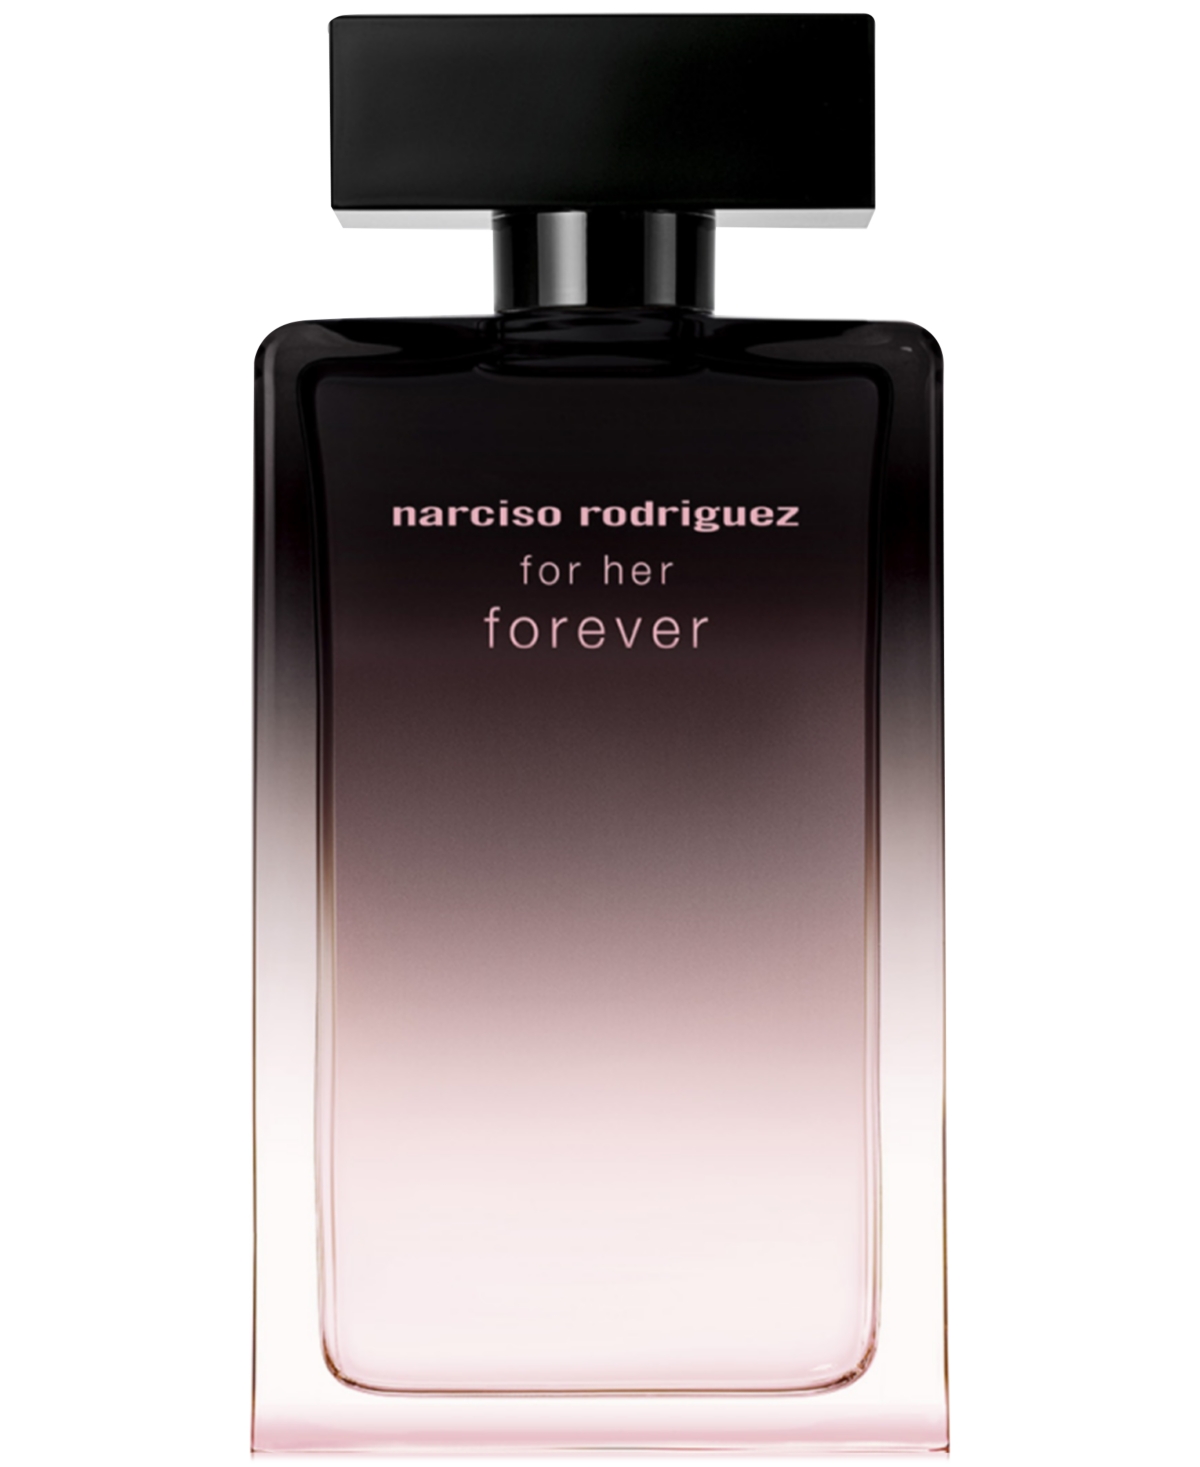 Narciso Rodriguez For Her Forever Limited-edition Eau De Parfum, 3.3 Oz.